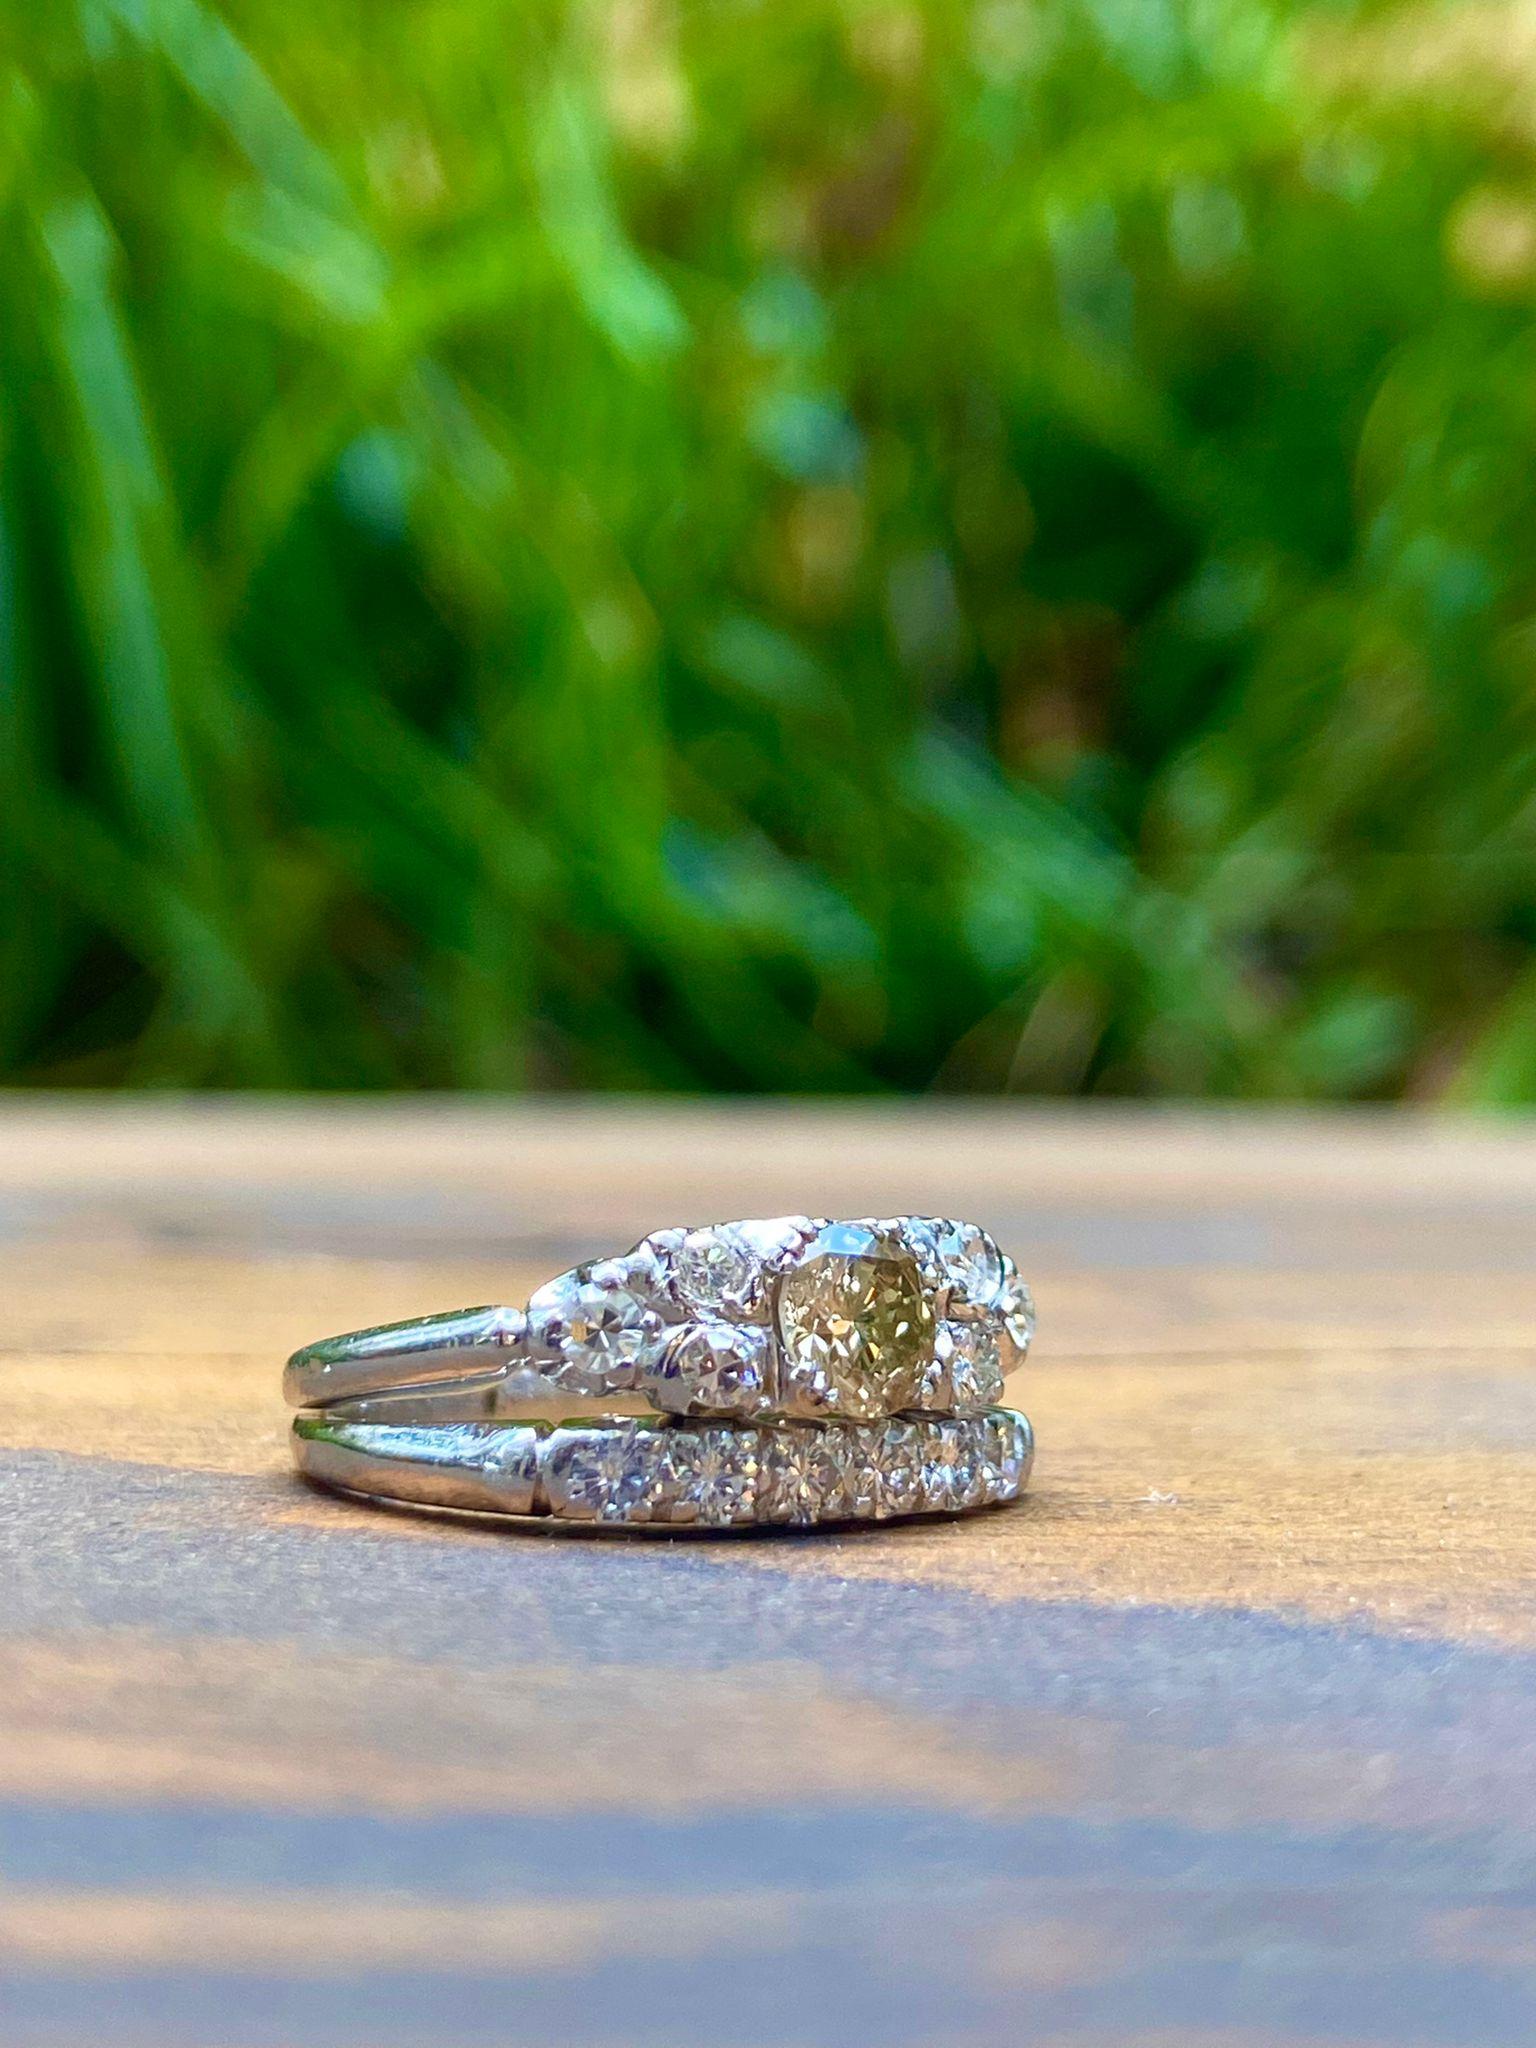 A Stunning Mid-Century Estate Vintage Round Shaped Diamond Ring from our Estate Collection - is actually comprised of a two-piece wedding set... Original vintage wedding sets are hard to find and this bright and splashy Platinum and diamond set from